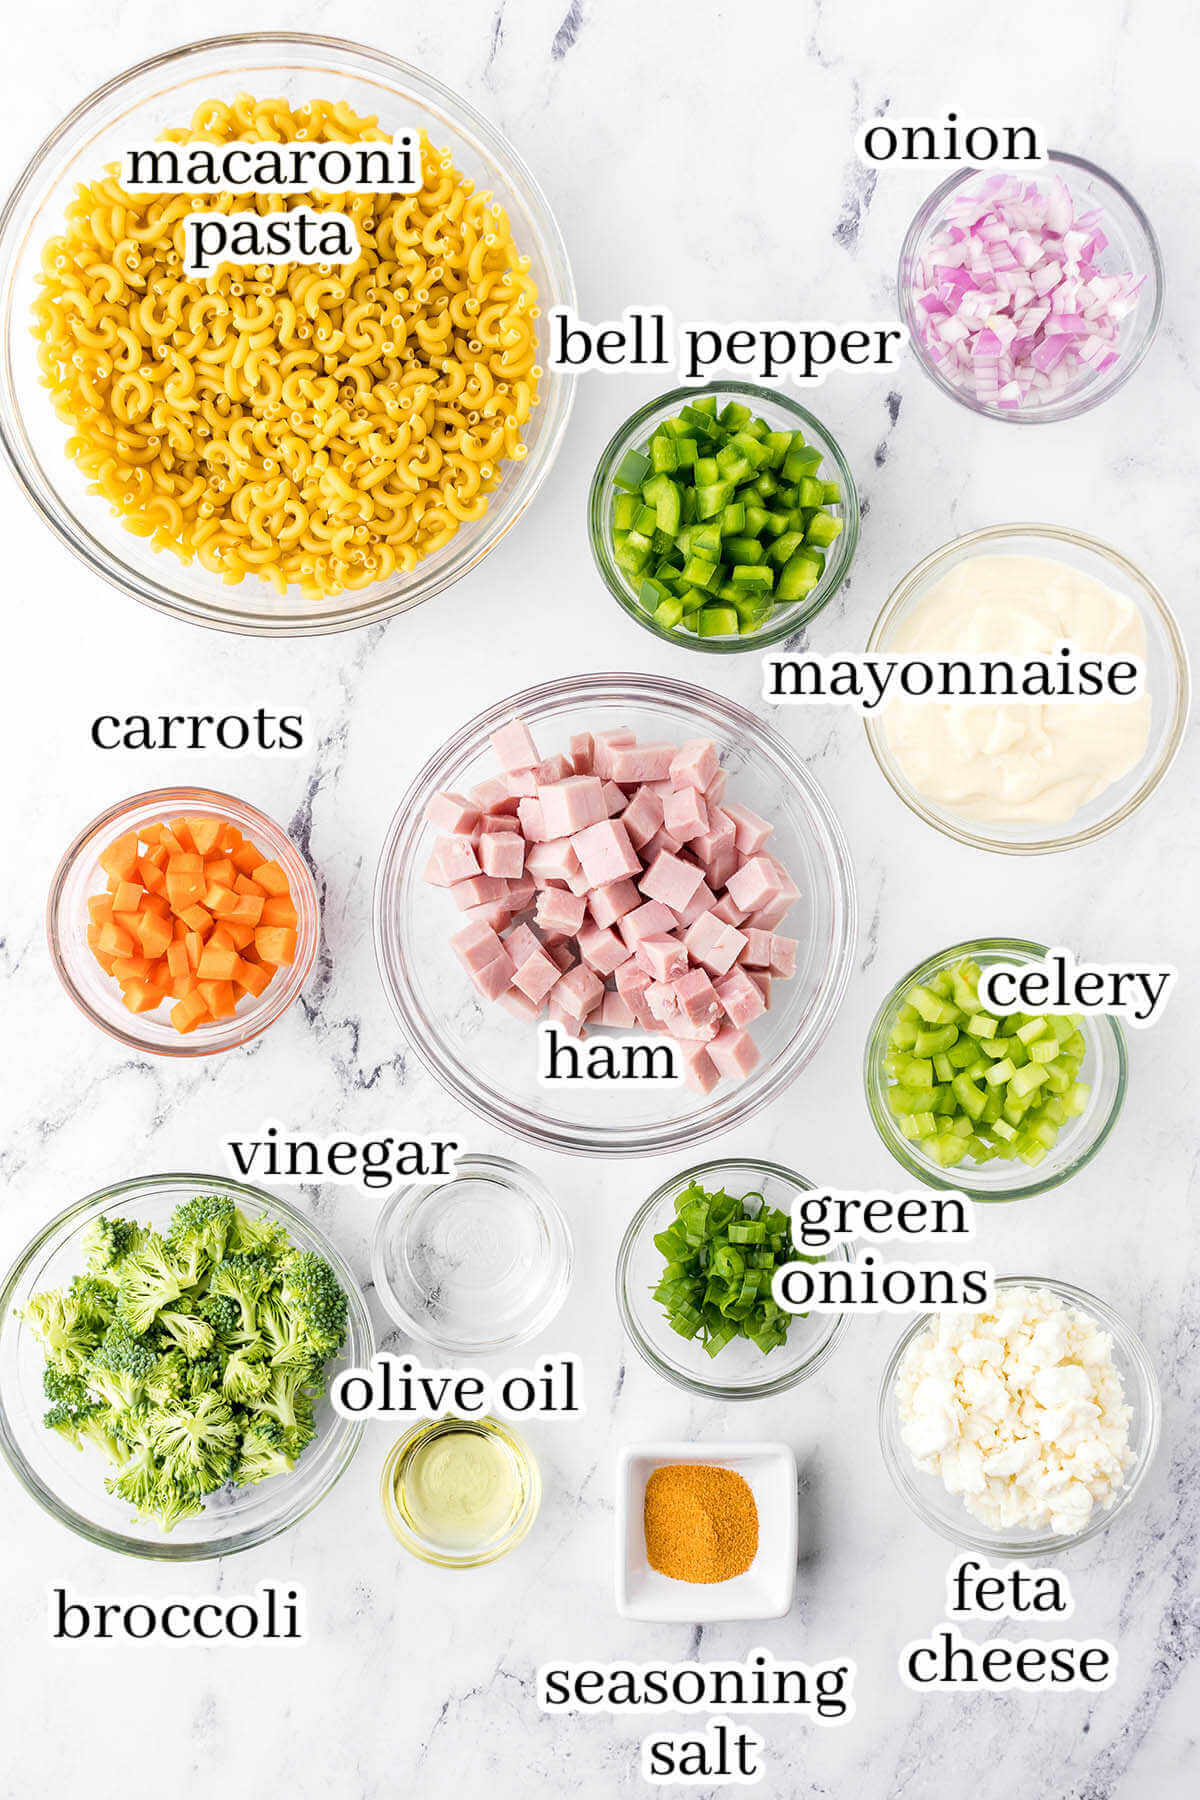 Ingredients to make pasta salad recipe, with print overlay.